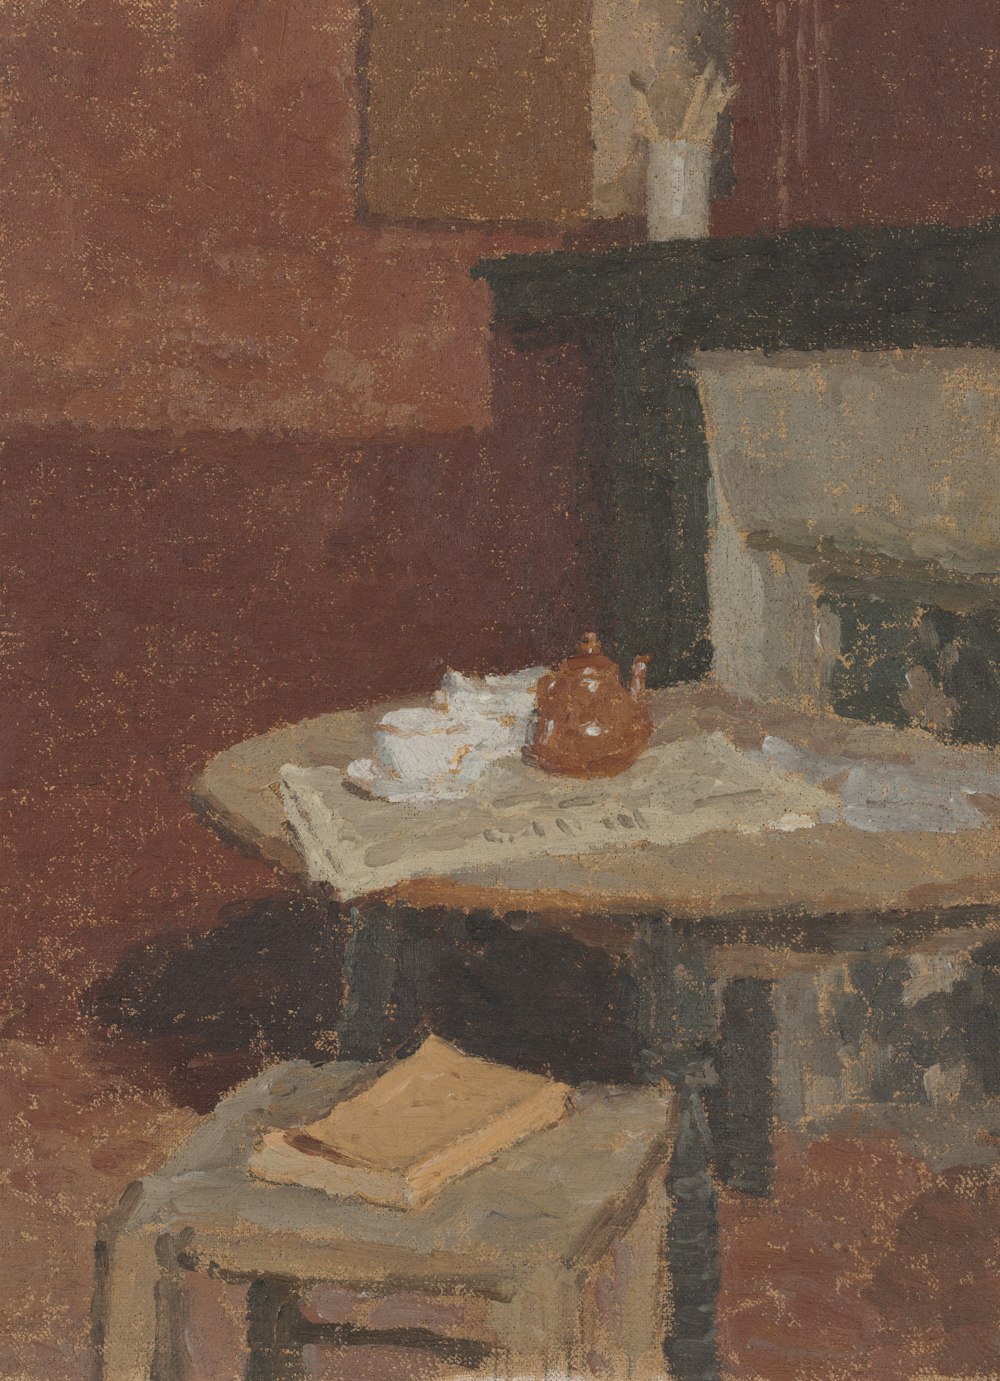 a painting of a table with a tea pot on it